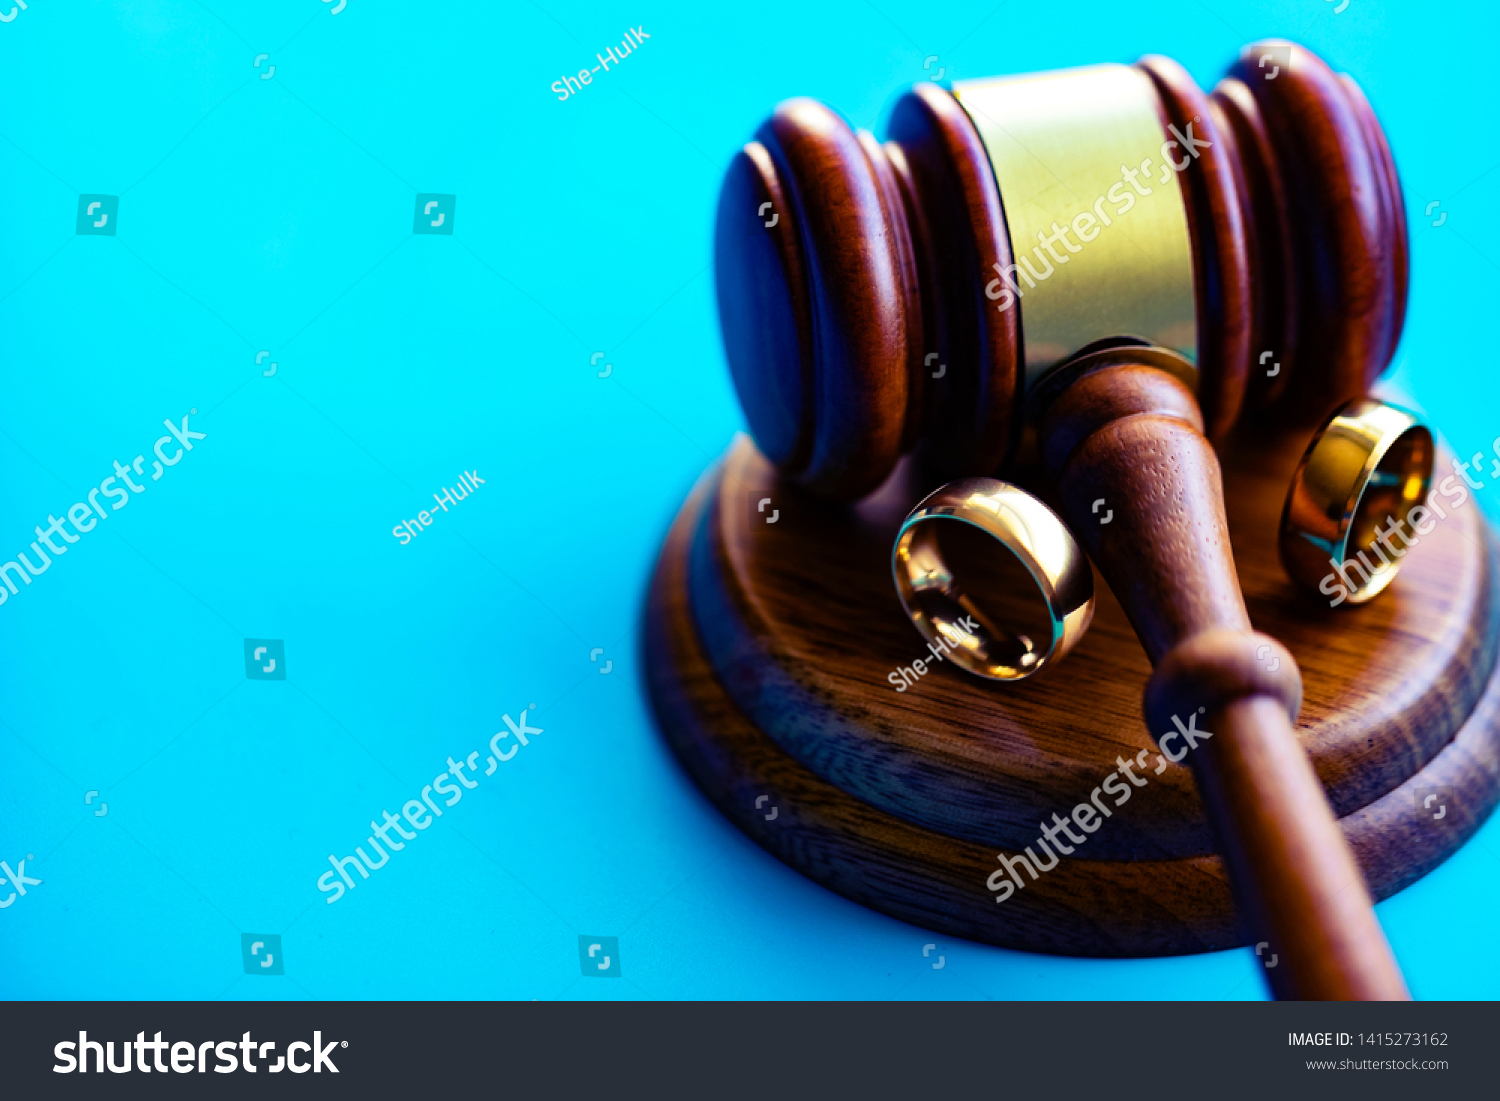 Wedding rings separated by judge hammer. Court decision on divorce concept. #1415273162